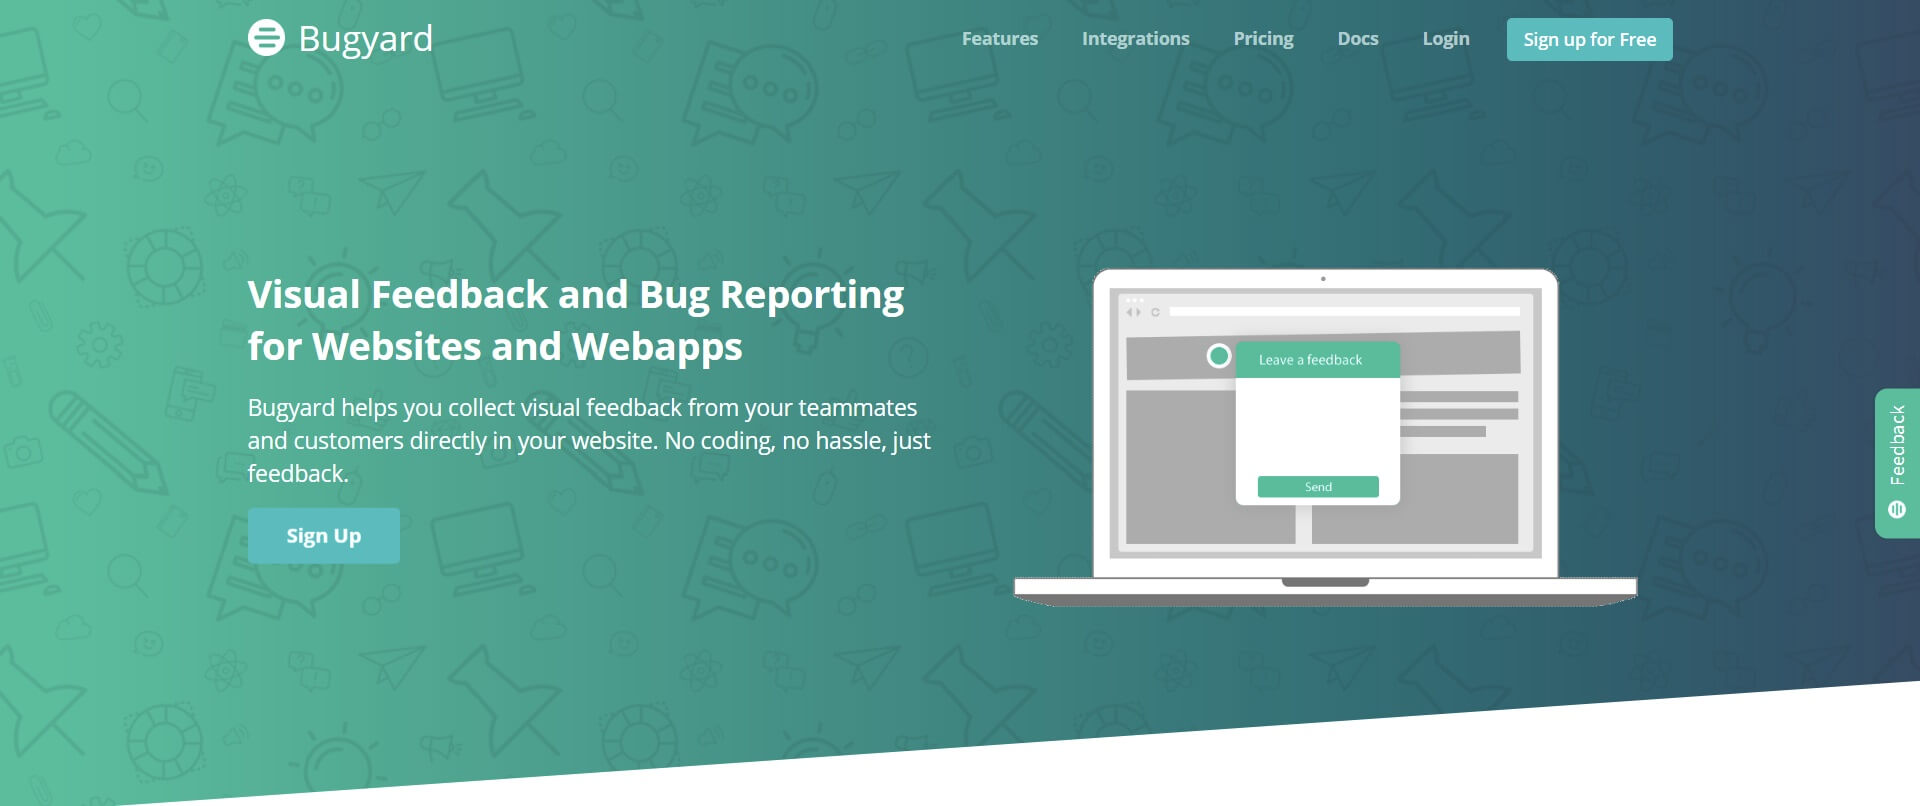 best bug tracking software, best issue tracking software, free bug tracking software, bug/issue tracking software, Java bug tracking software, web-based bug tracking software, bug reporting software, bug management software, issue reporting software, issue management software